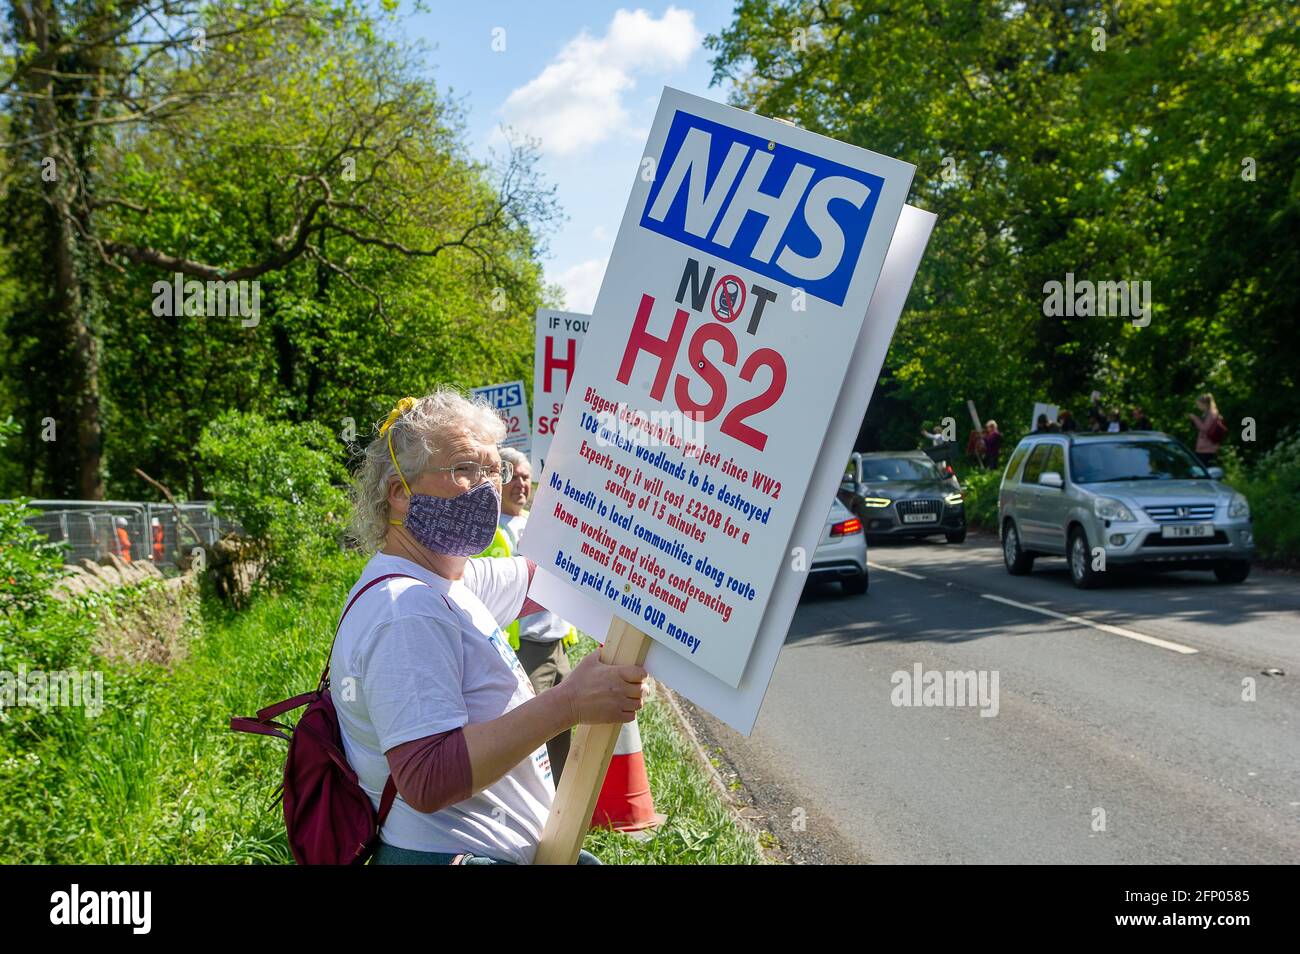 Aylesbury, Buckinghamshire, UK. 19th May, 2021. Local residents and Stop HS2 campaigners were peacefully protesting in Aylesbury today against the High Speed 2 rail which is causing a huge amount of destruction throughout Buckinghamshire. The protesters were getting a lot of support from passing drivers as they hooted their horns for HS2 to be scrapped. Credit: Maureen McLean/Alamy Stock Photo